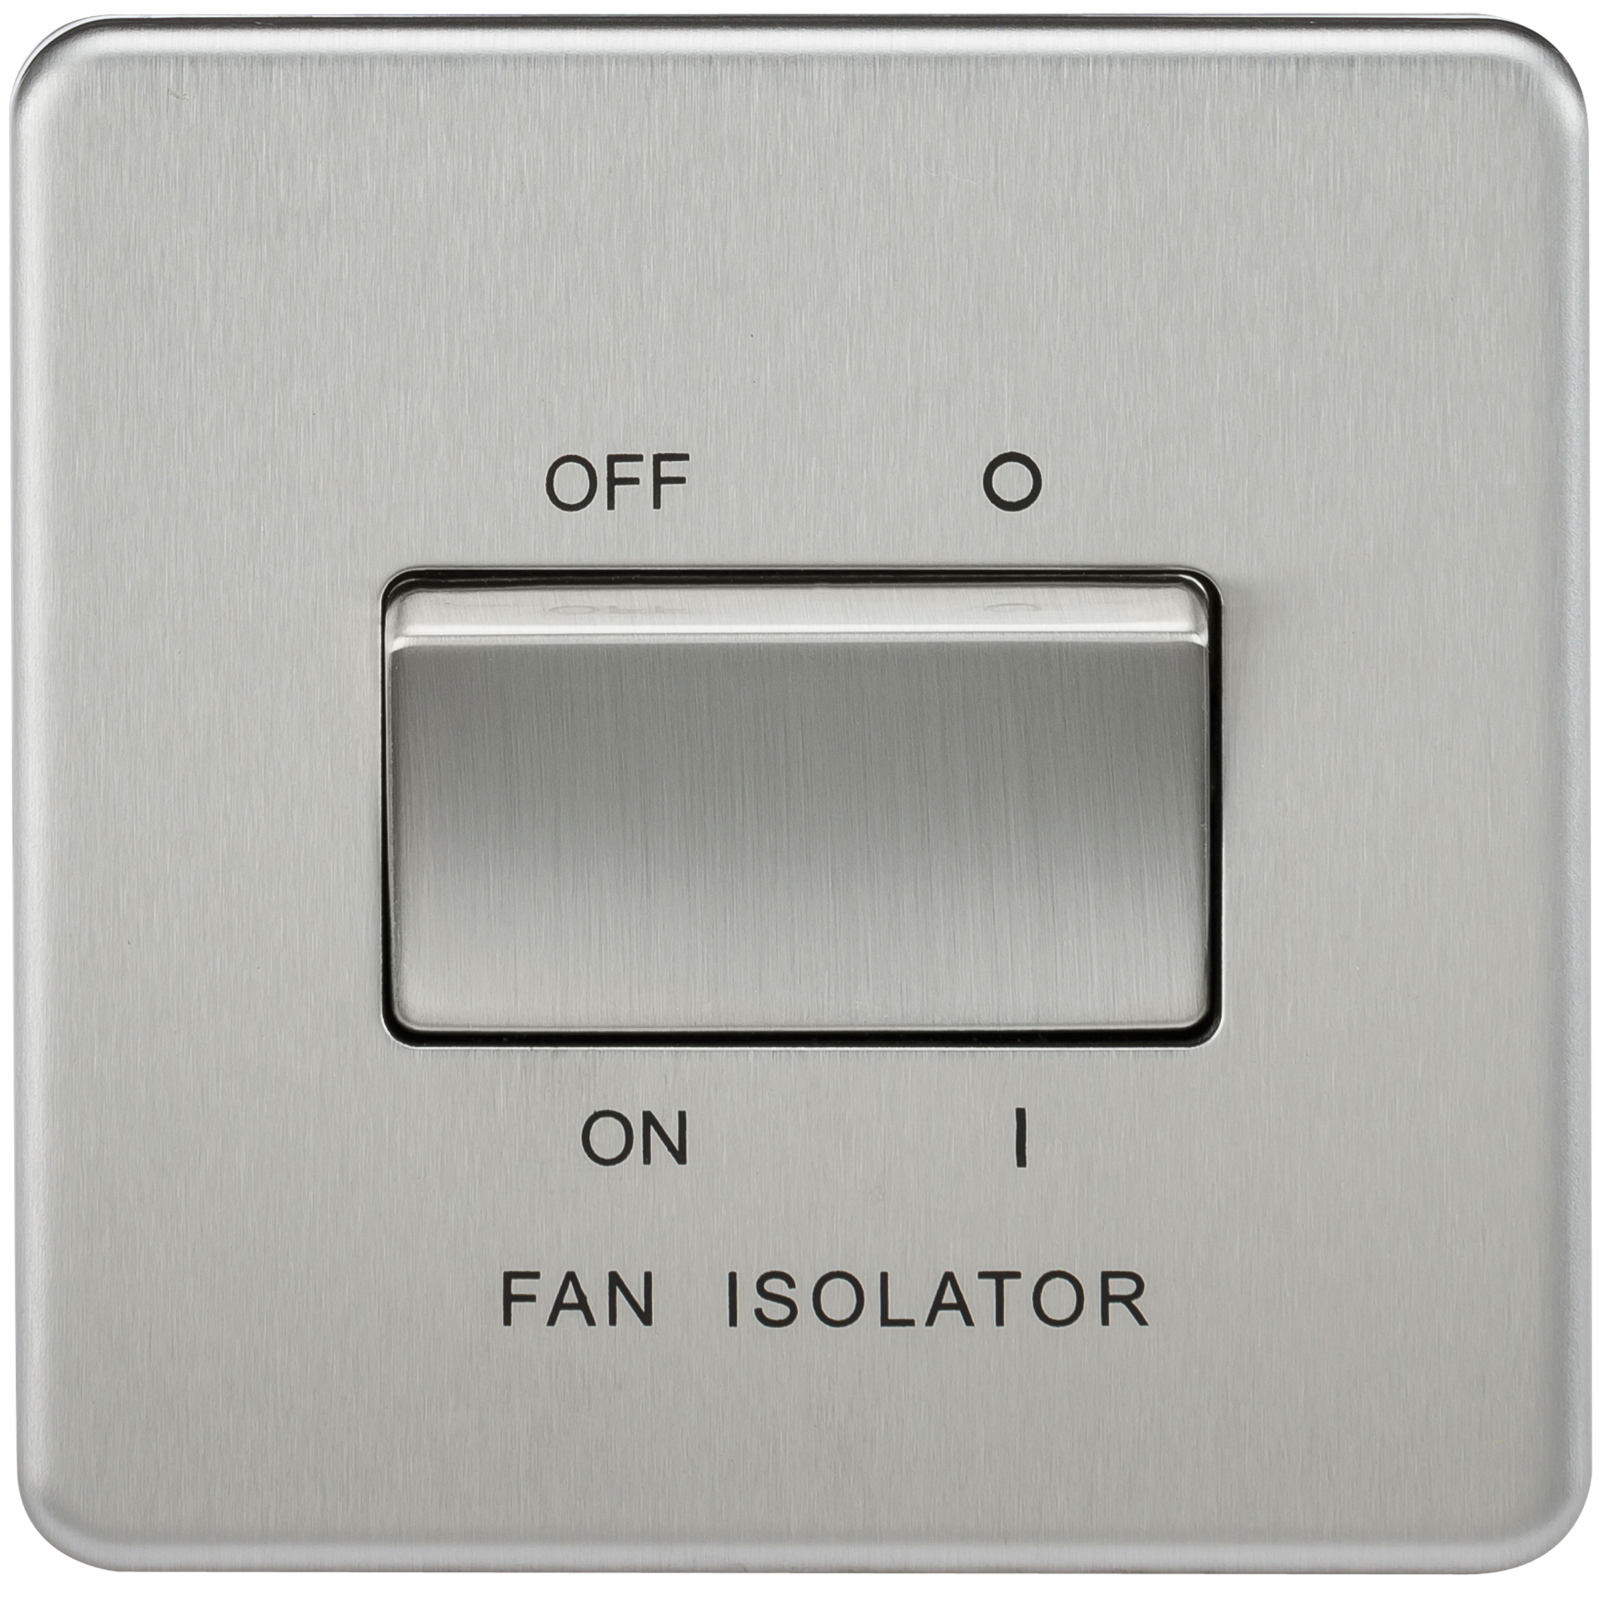 Screwless 10A 3 Pole Fan Isolator Switch - Brushed Chrome - SF1100BC 